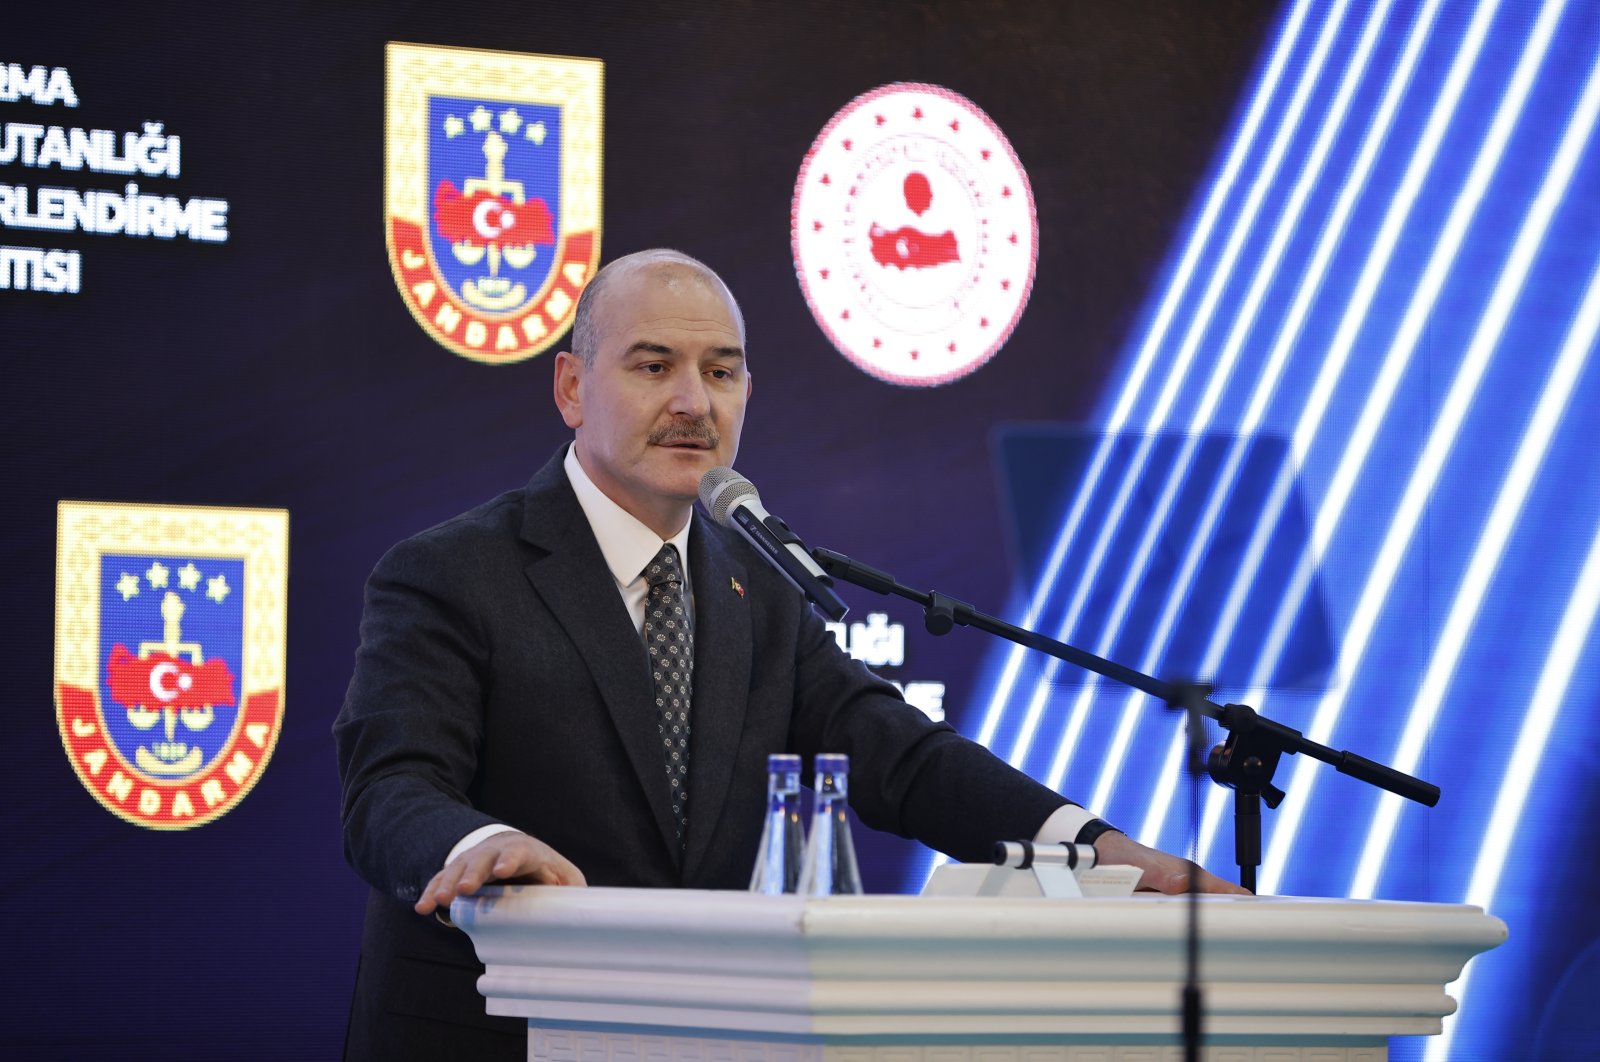 Interior Minister Süleyman Soylu speaks at the evaluation meeting of the year 2021 at the Gendarmerie General Command in Ankara, Turkey, Feb.16, 2022. (AA Photo)